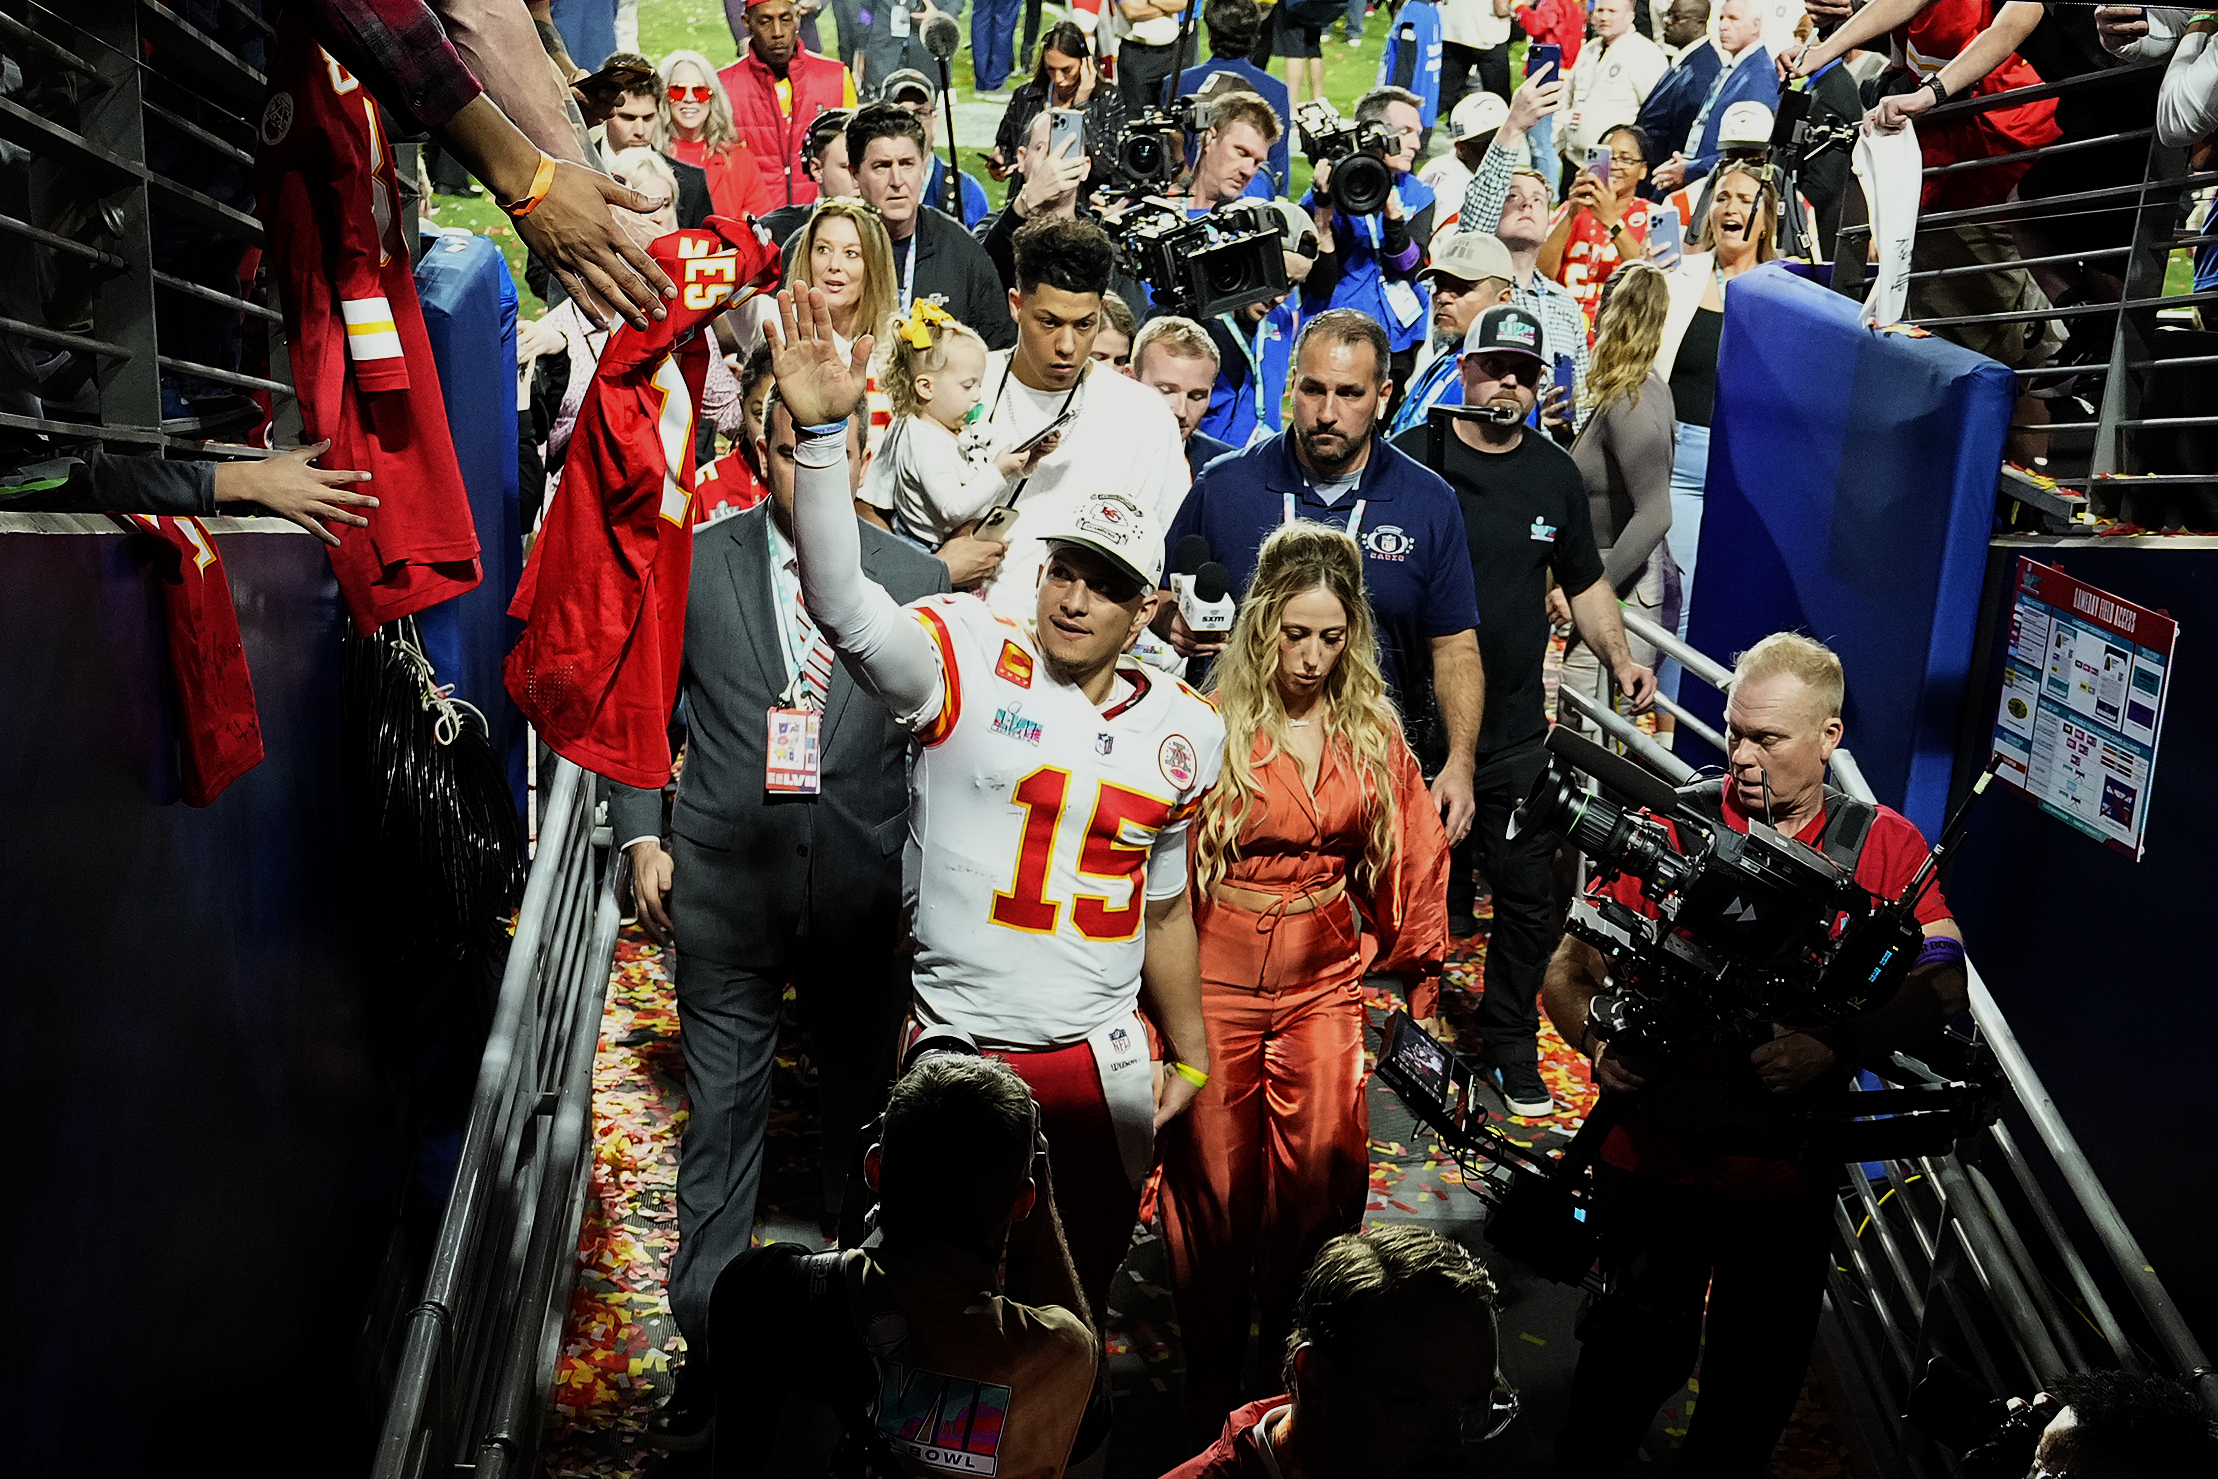 Native Americans grapple with Chiefs Super Bowl celebrations